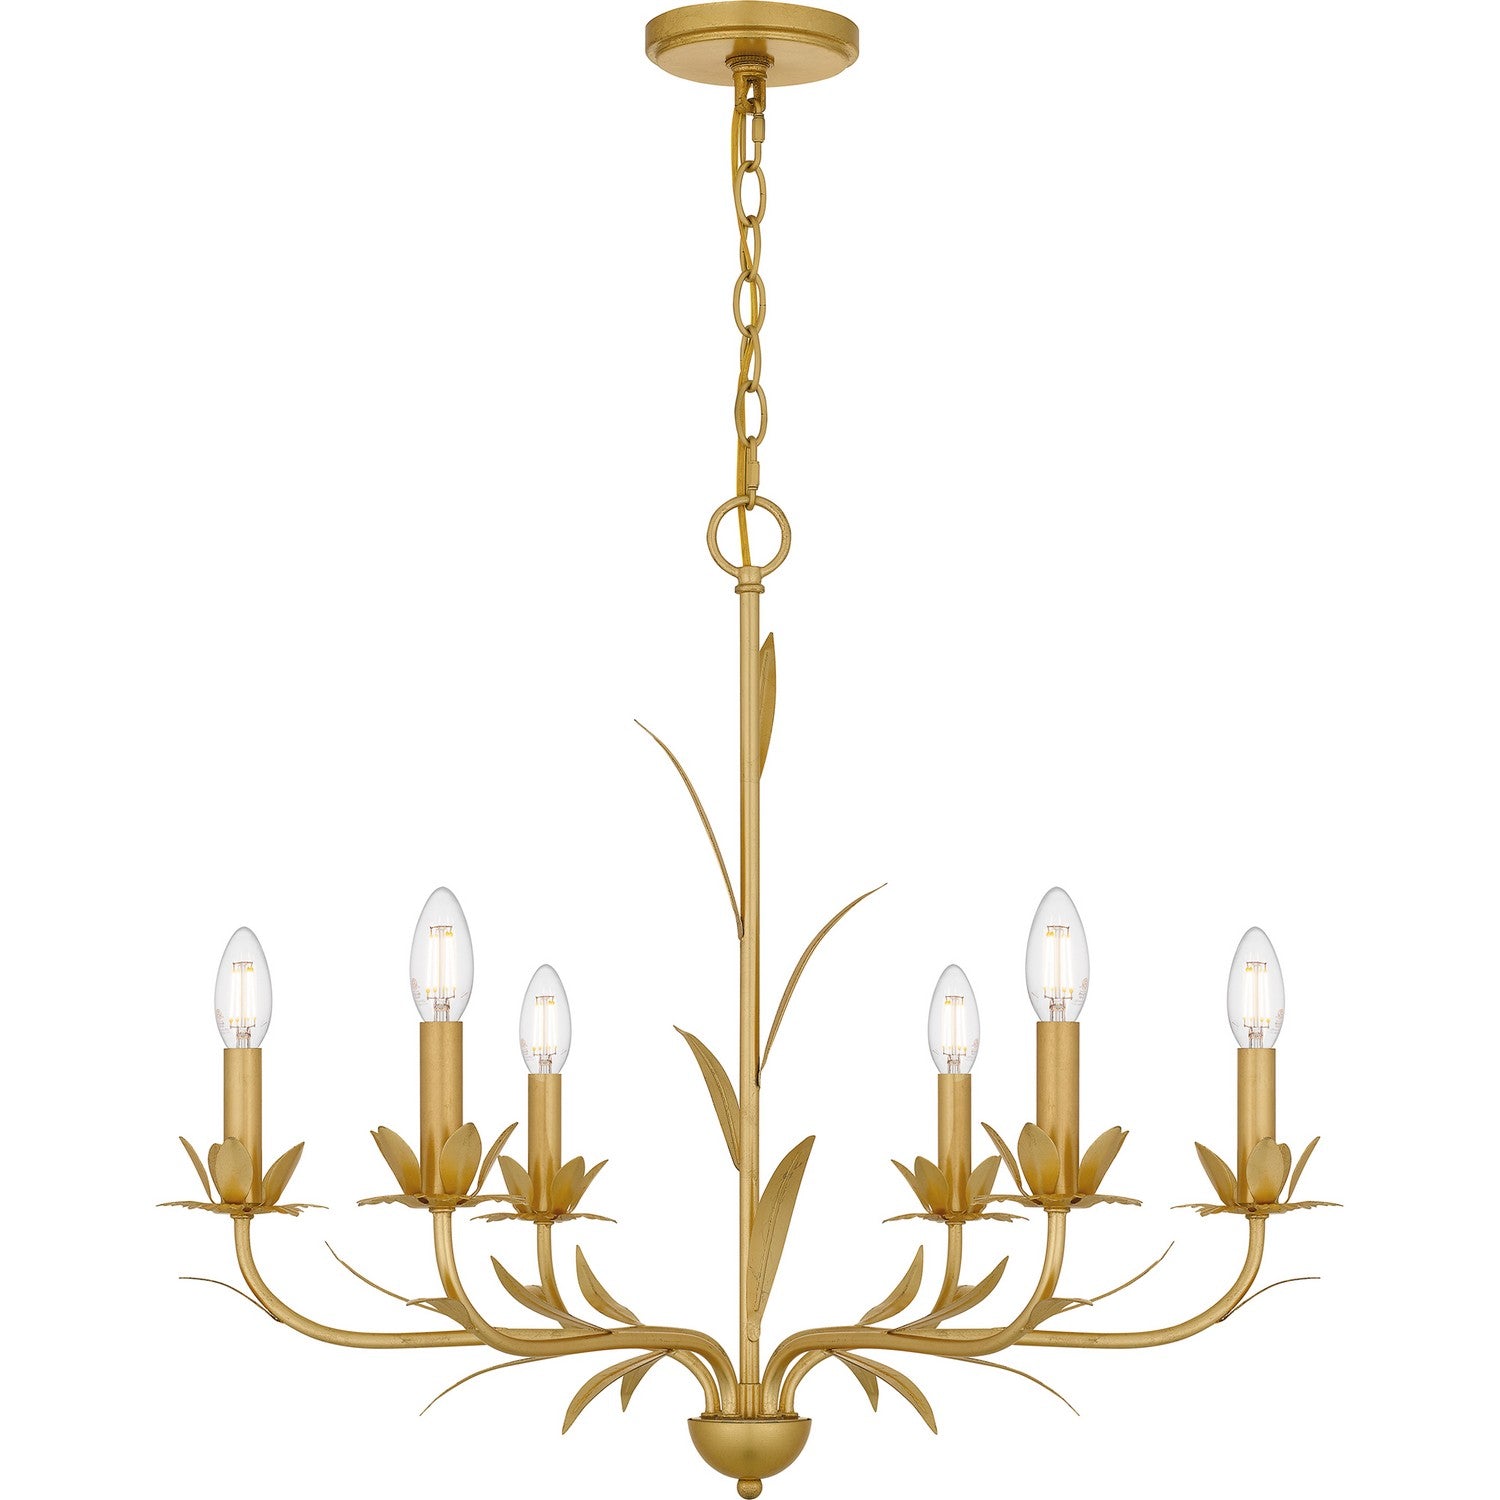 Maria Six Light Chandelier by Quoizel in Gold Leaf Finish (MAA5027GFL)